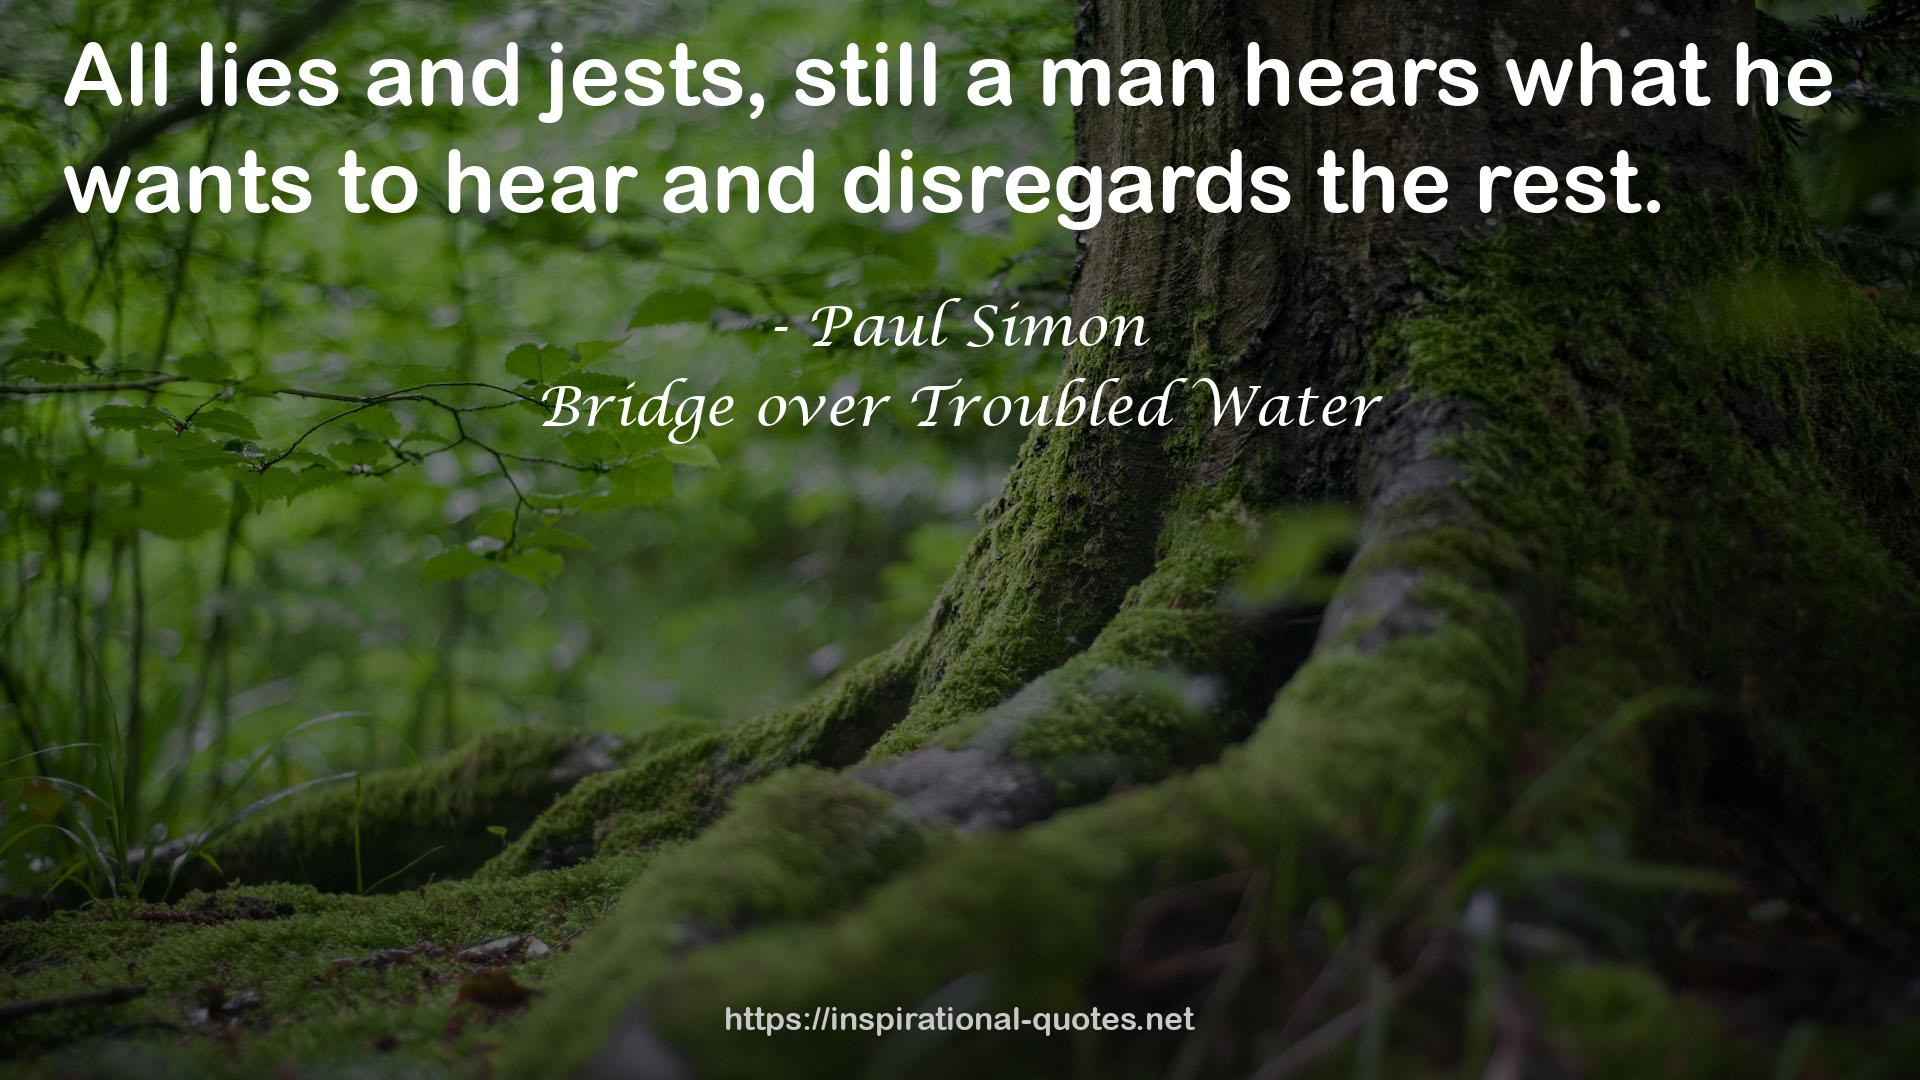 Bridge over Troubled Water QUOTES